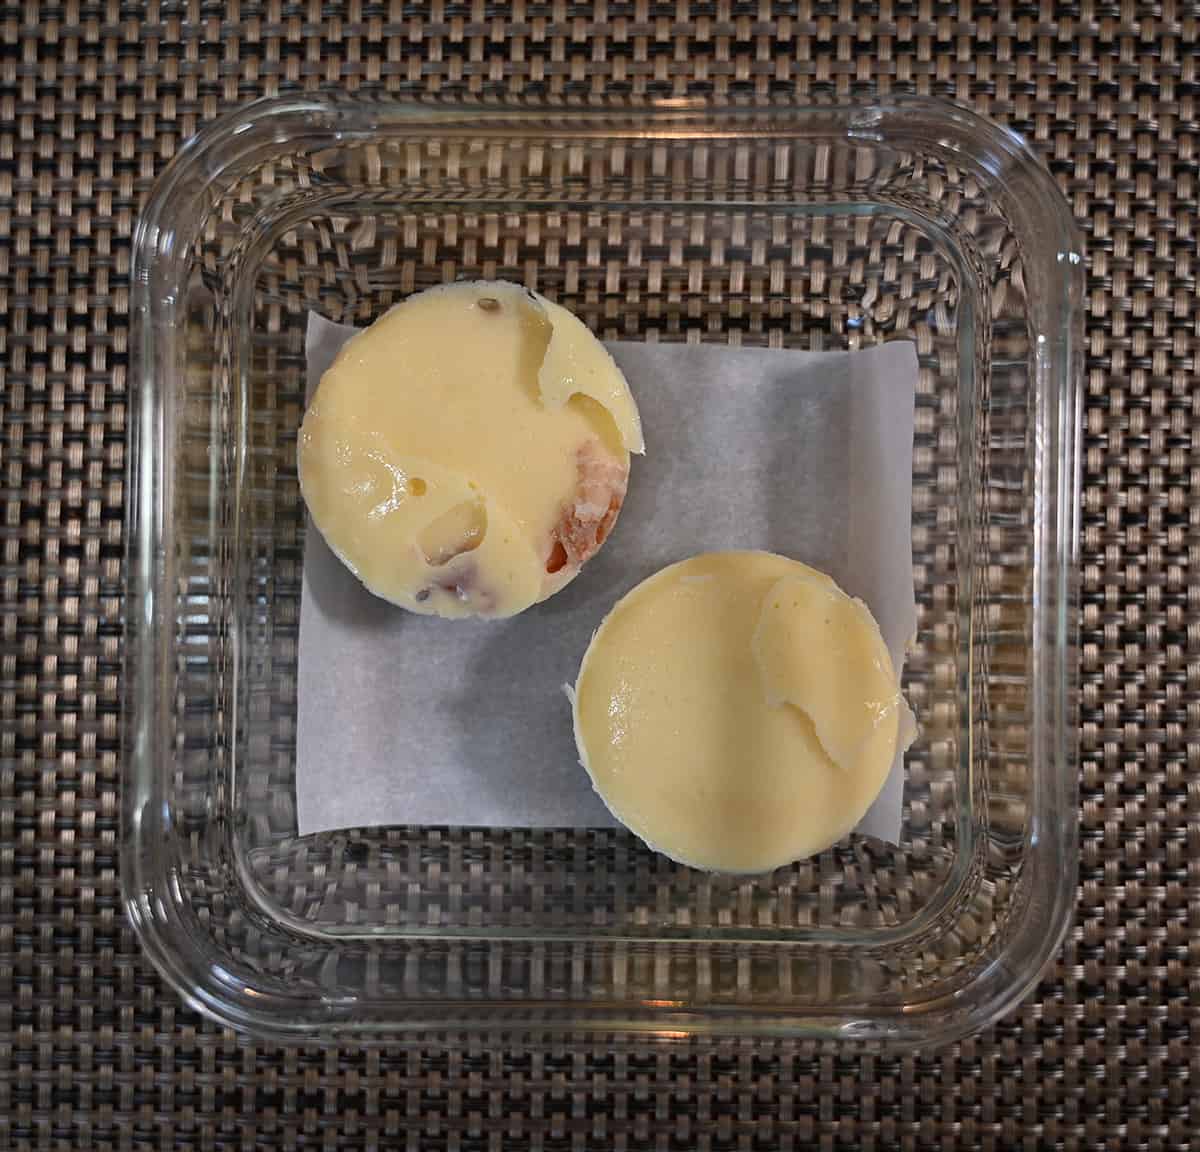 Top down image of two uncooked egg bites sitting in the tray they come in prior to cooking them.